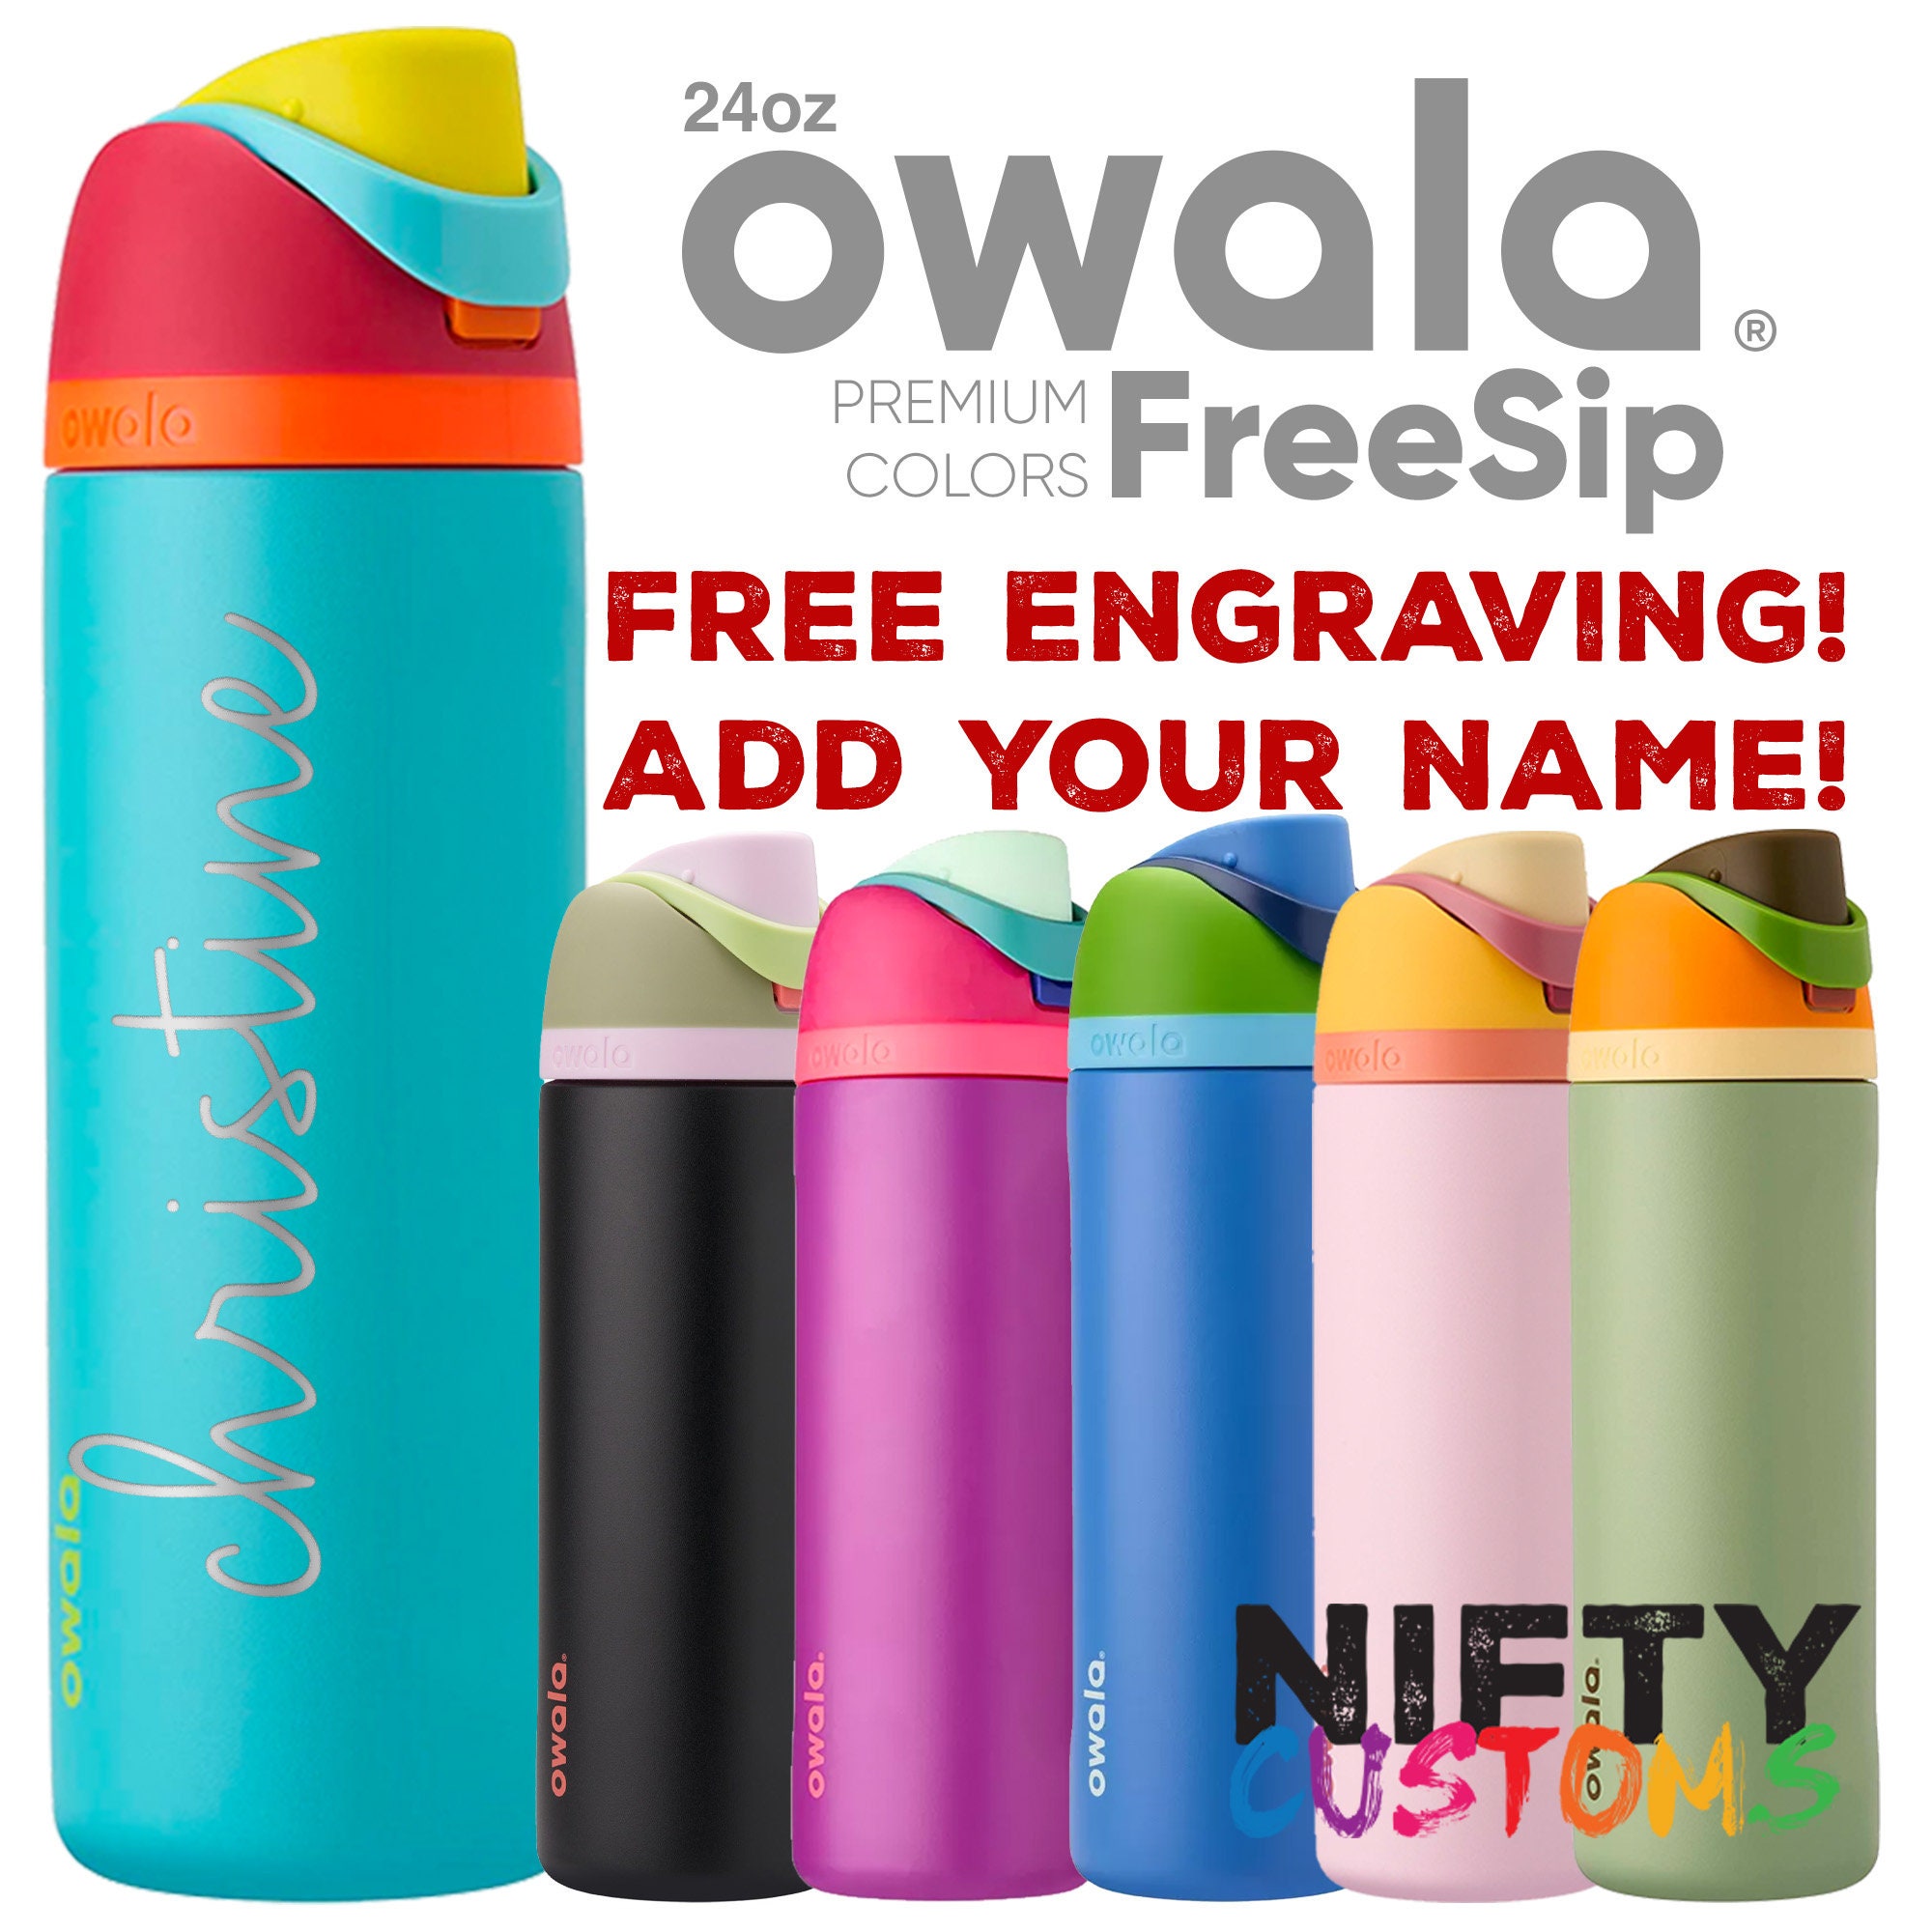 Personalized Water Bottle Owala Freesip 24oz Premium Colors FREE